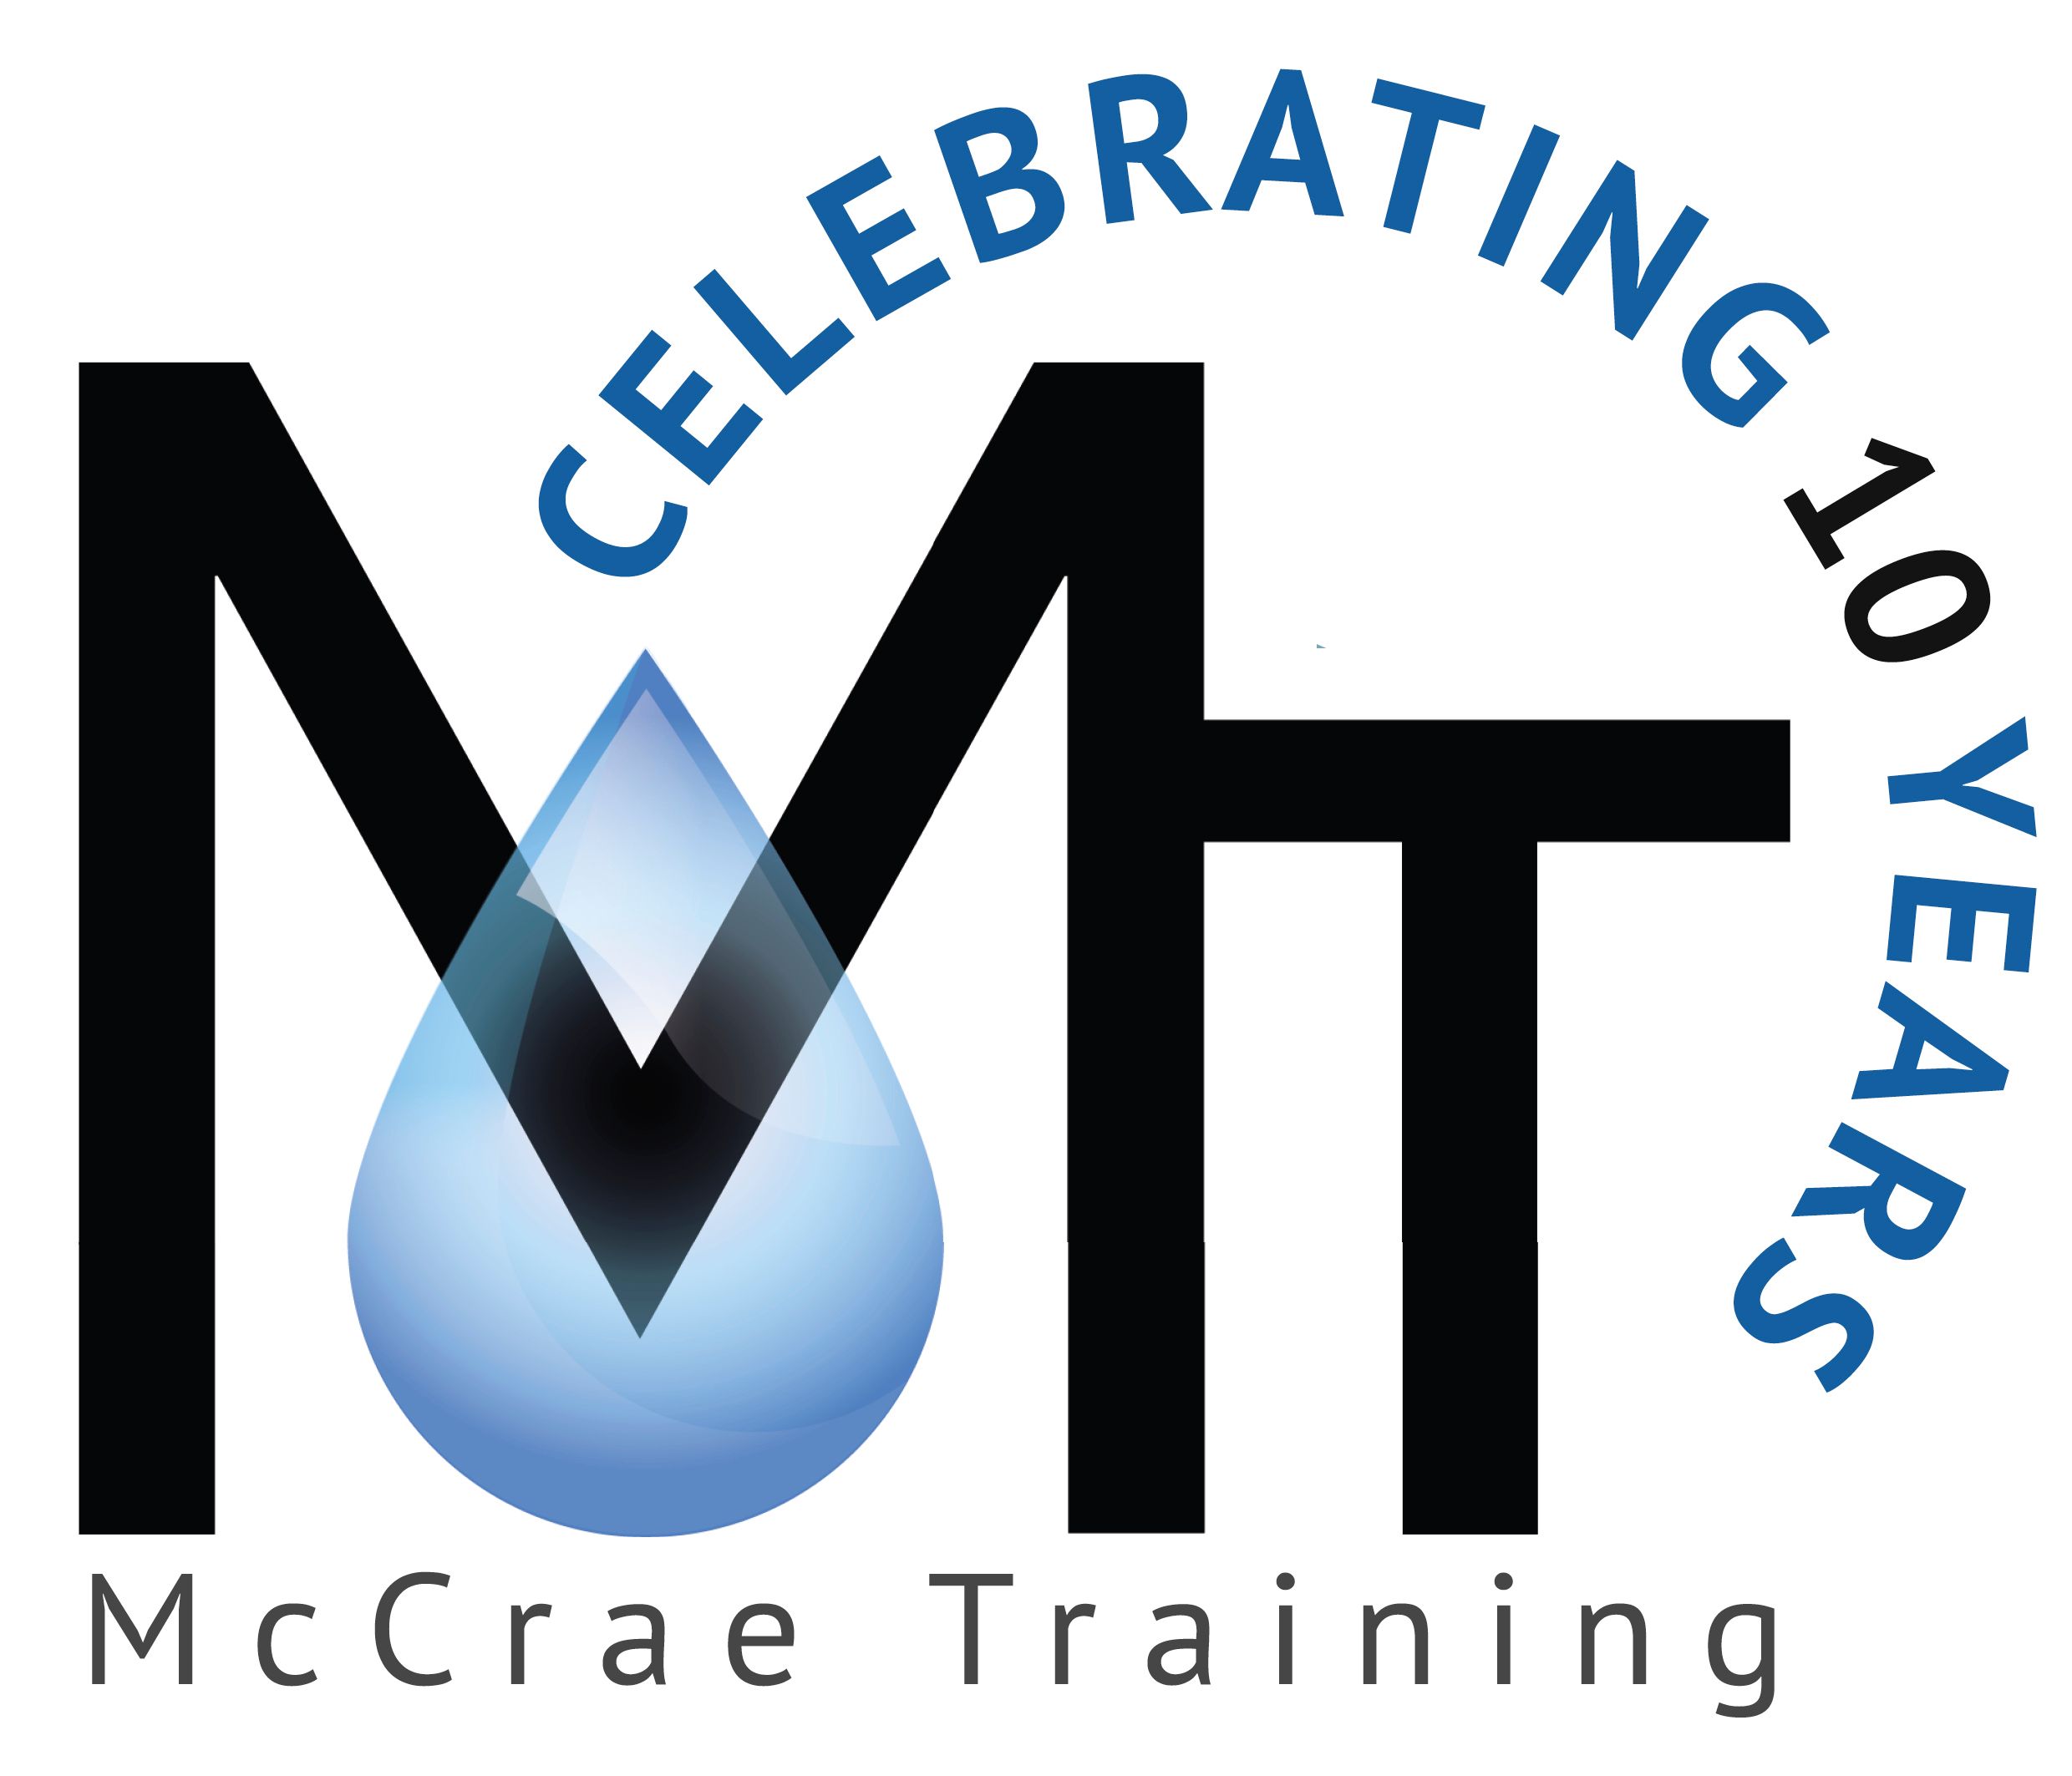 Leading Water and Utility Training Provider Celebrates 10 years in Business